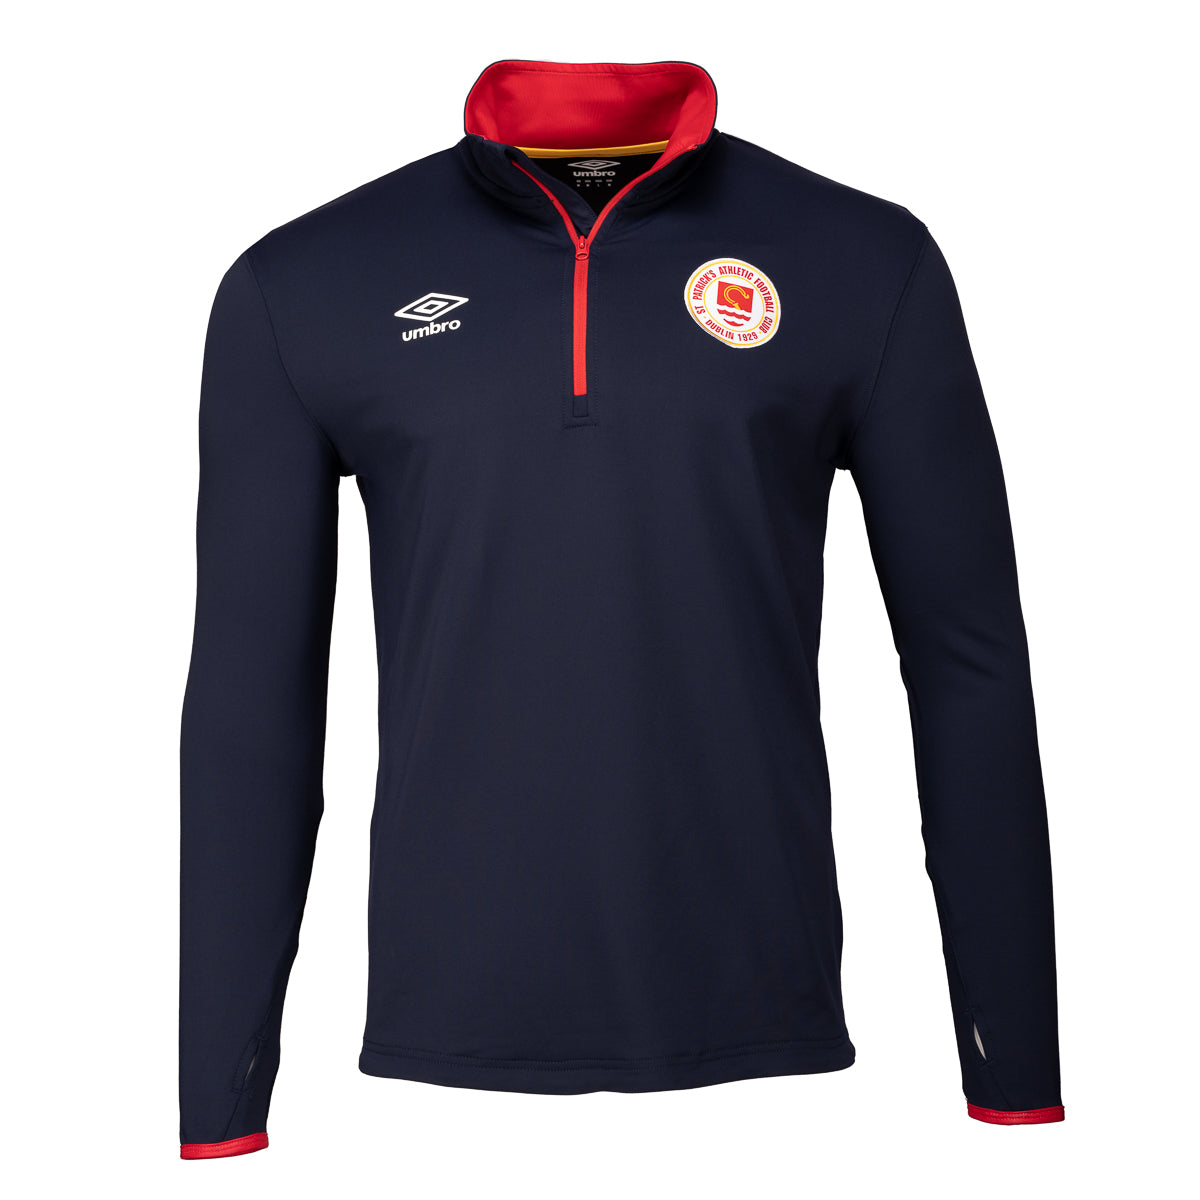 2022 Match Day Warm up 1/4 Zip - Navy/Red - Adult - (2223)